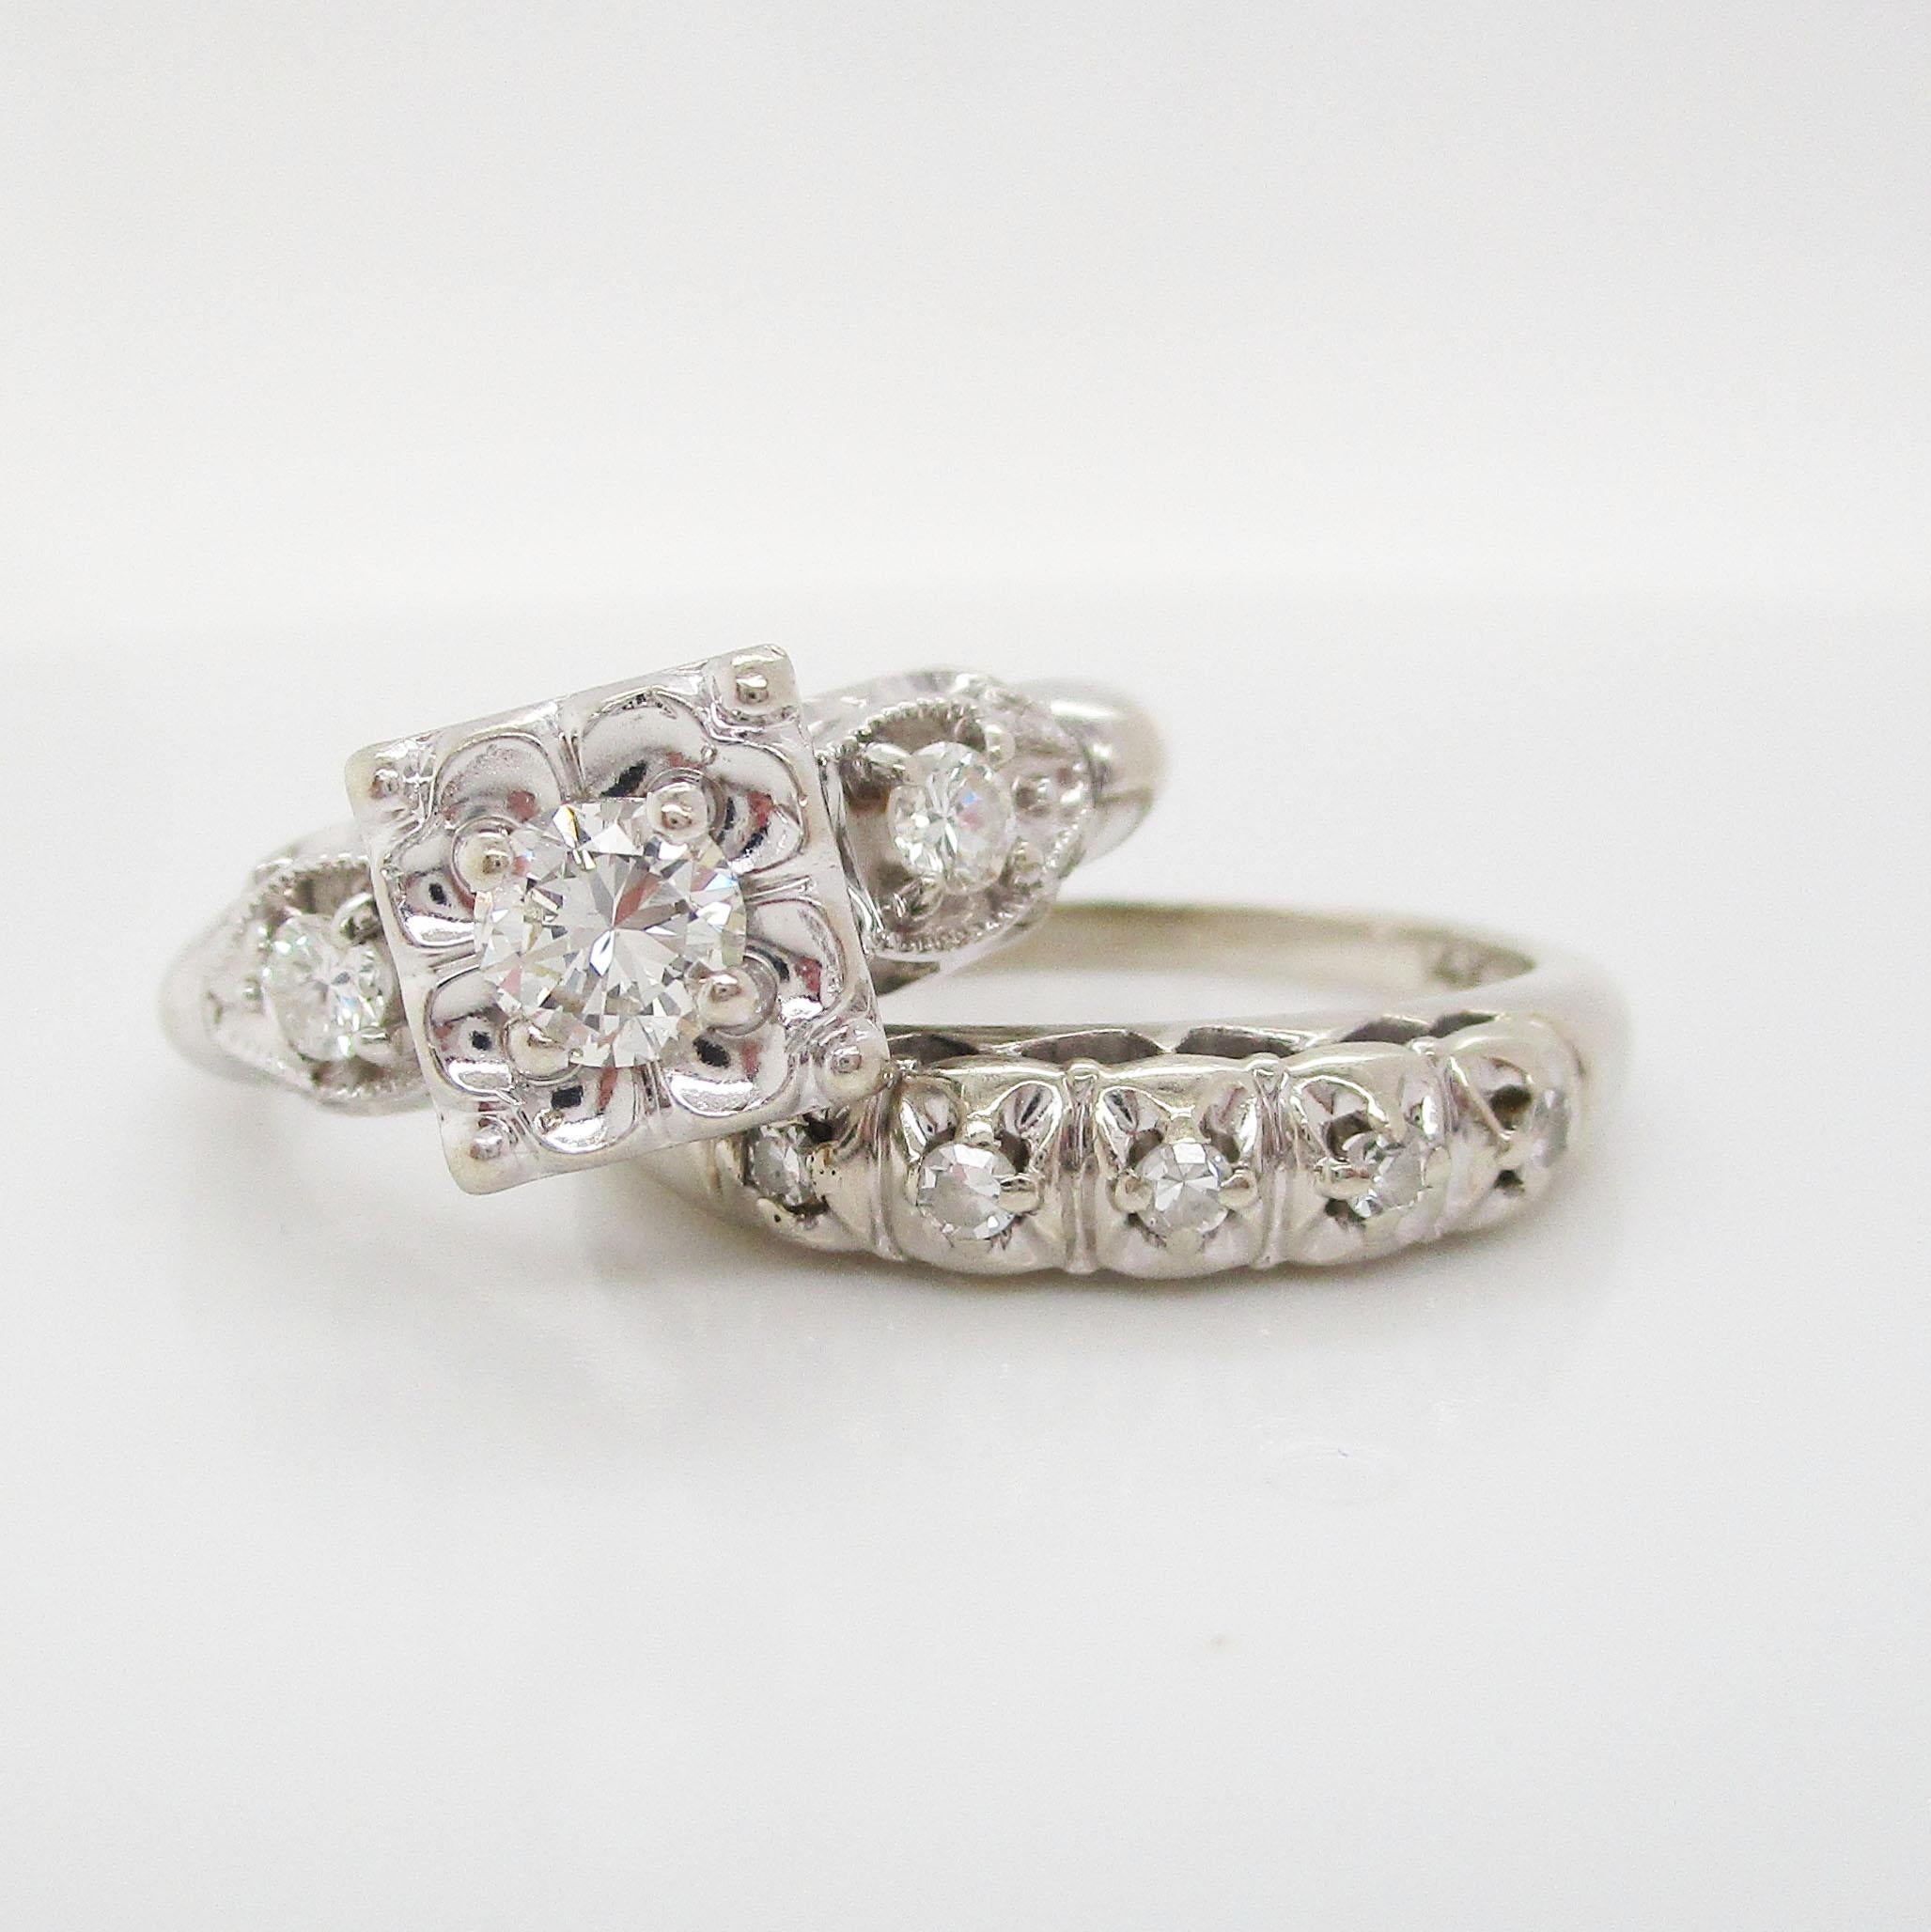 This is a truly gorgeous vintage diamond wedding set in 14k white gold with a beautiful mid-century design! The band is a classic five stone layout with a pierced under gallery detail. The band is lovely enough to be worn on its own by the busy